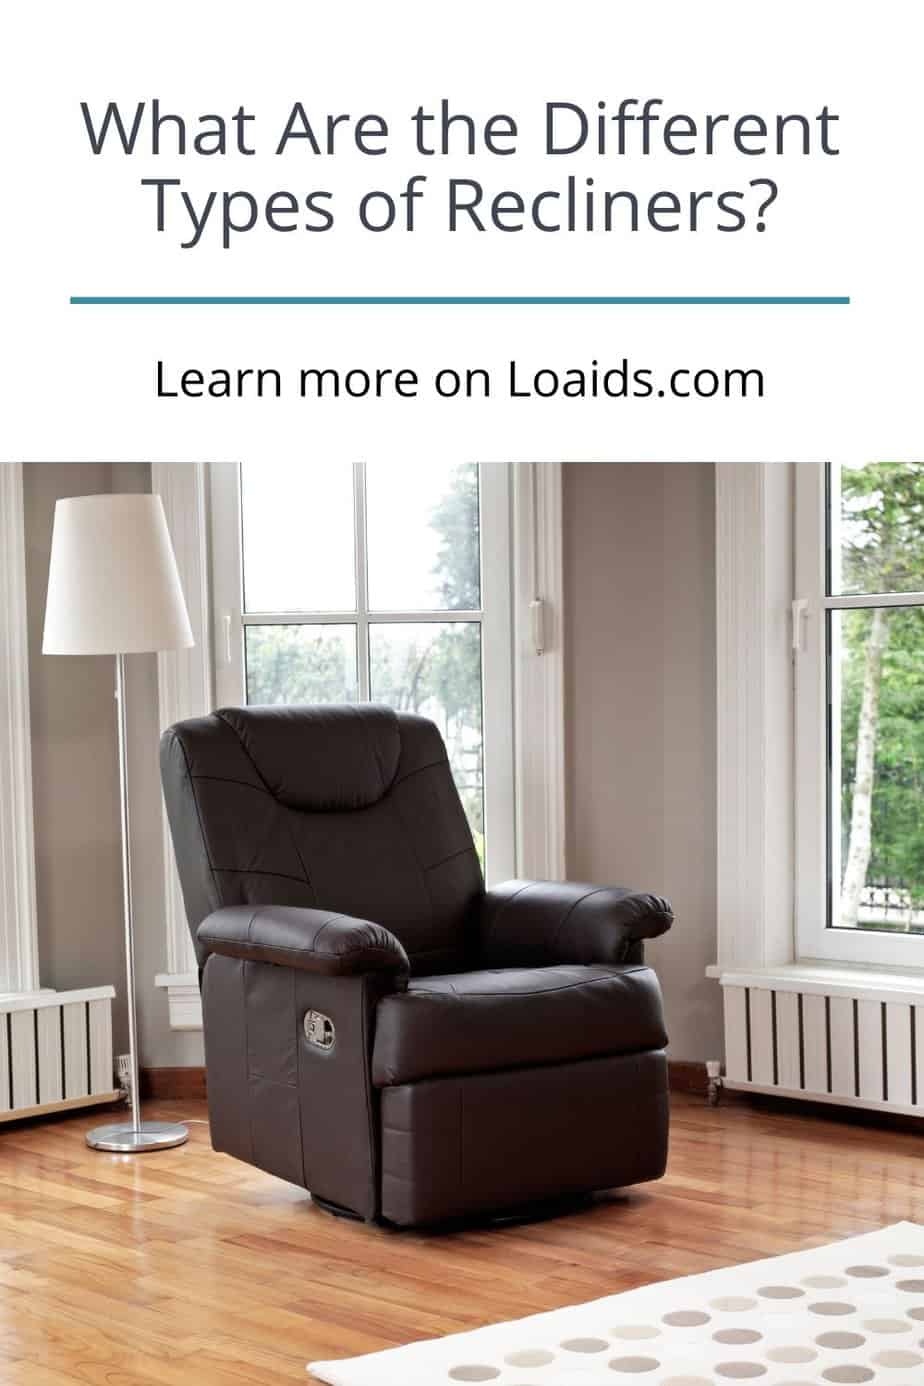 a recliner from one the different types of recliners